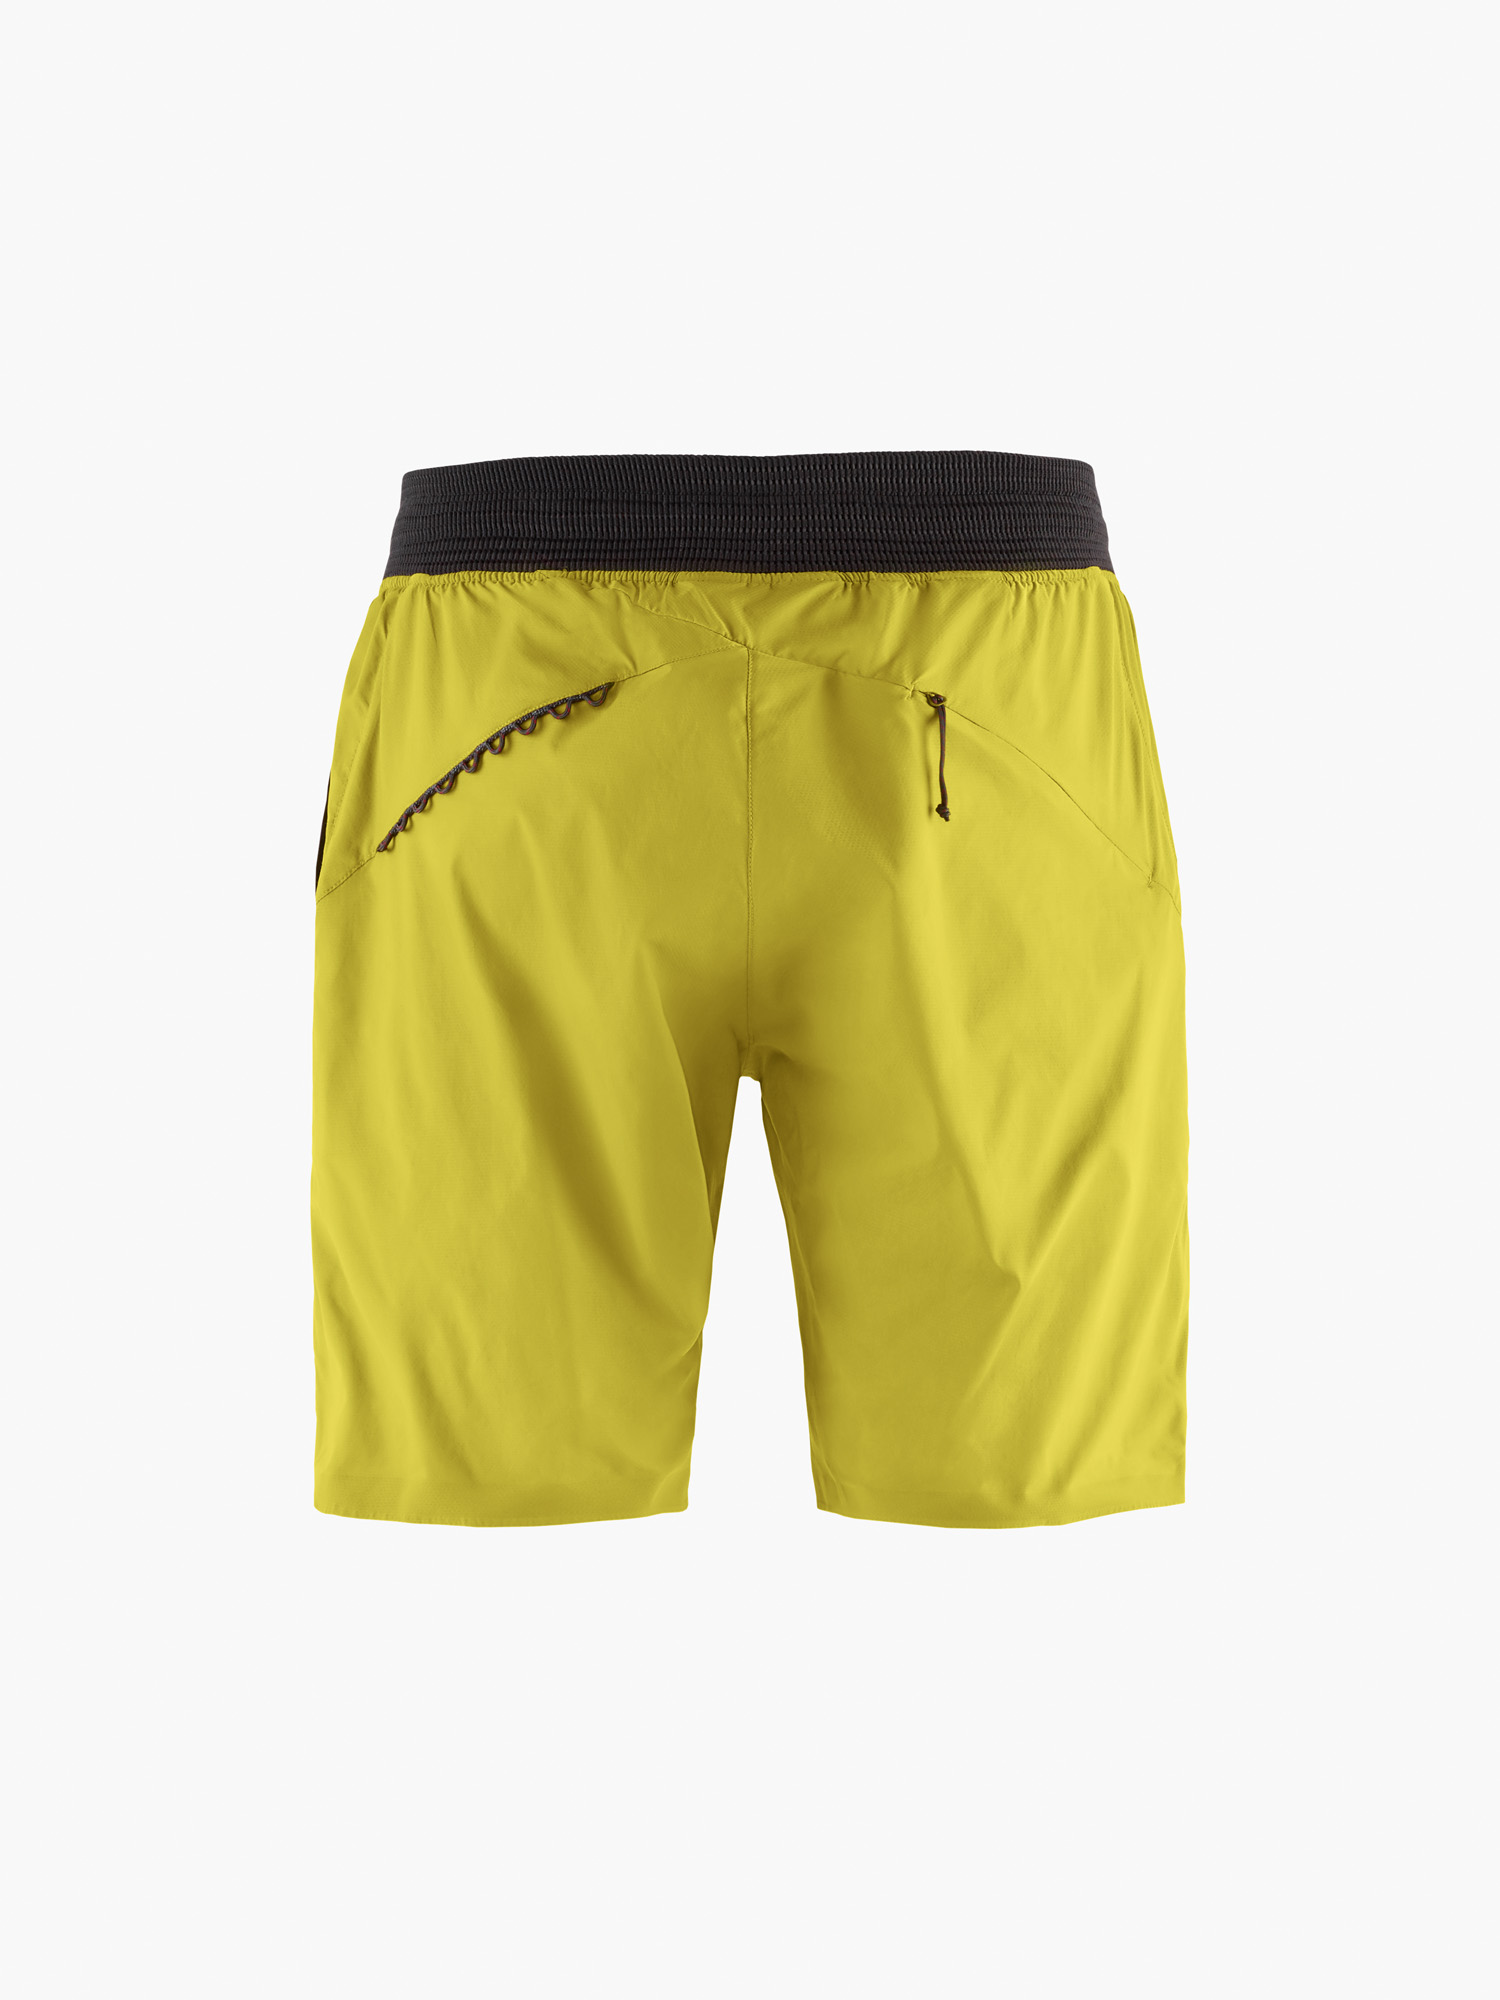 10113 - 74 Levitend Active Shorts M's - Pine Sprout